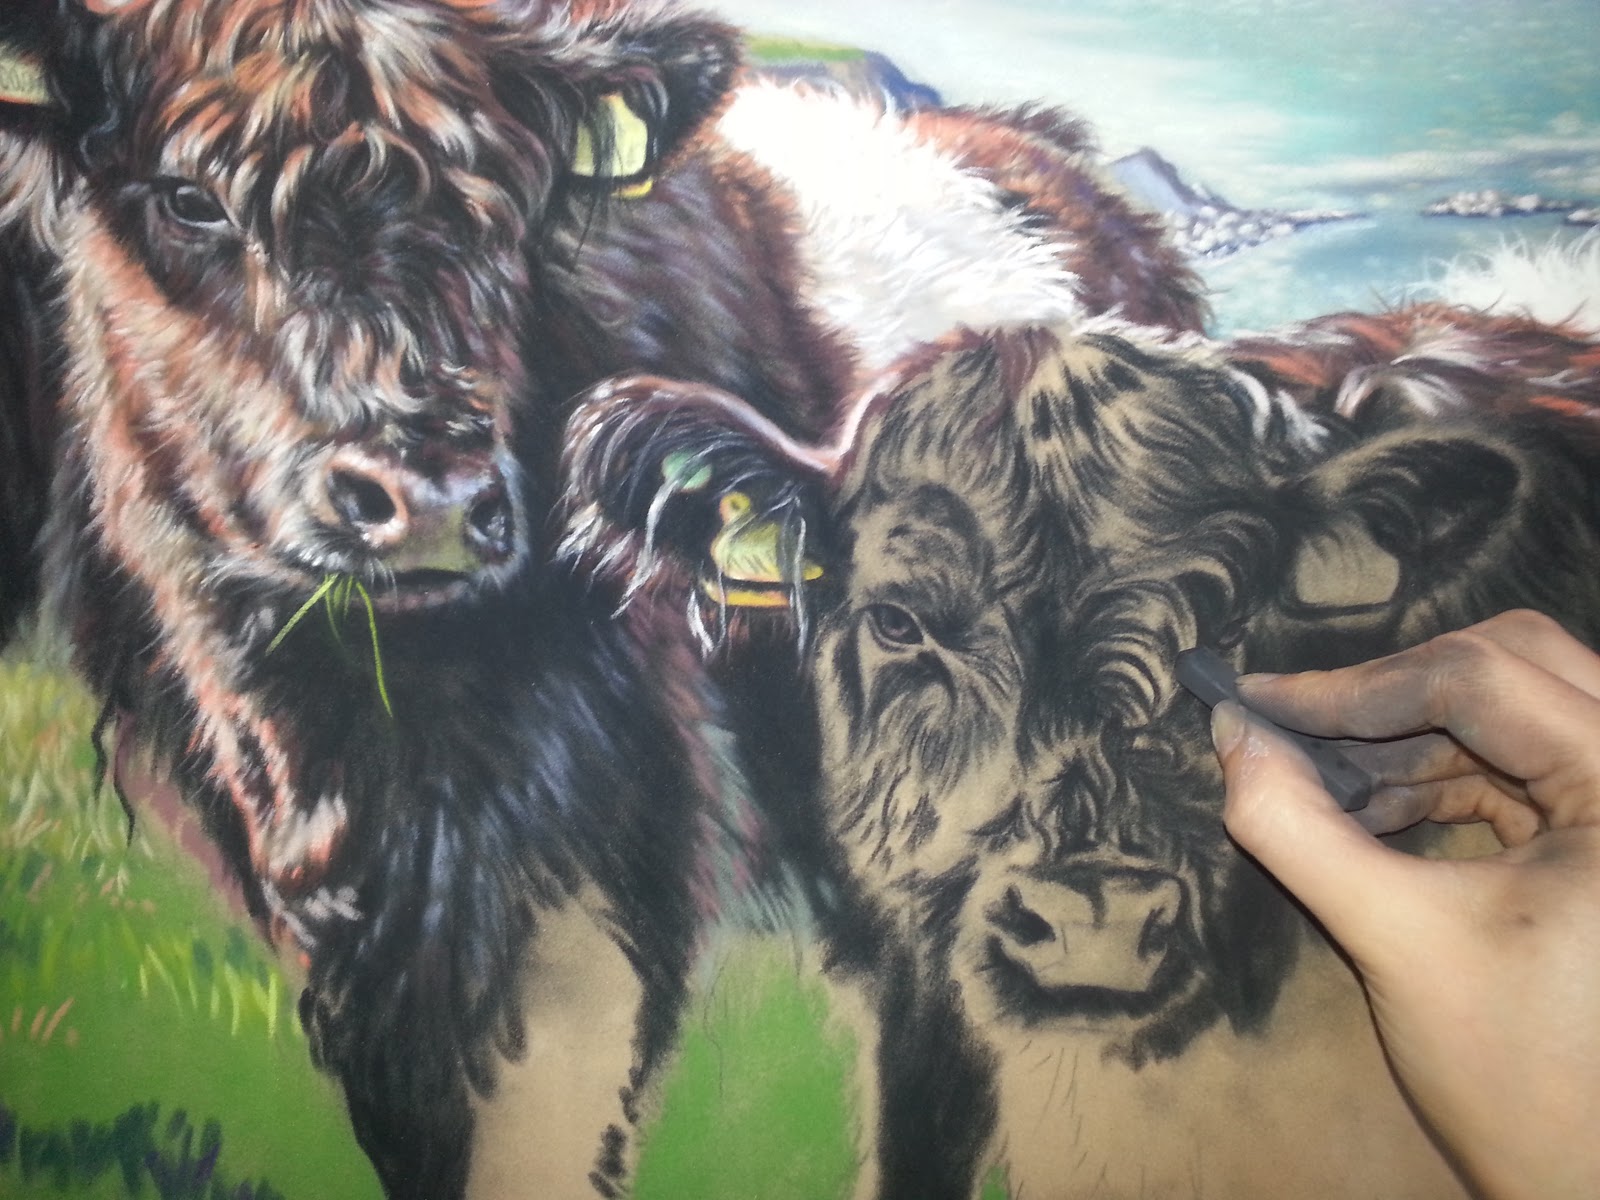 8. When painting animals, you can "build up the fur" in pastel